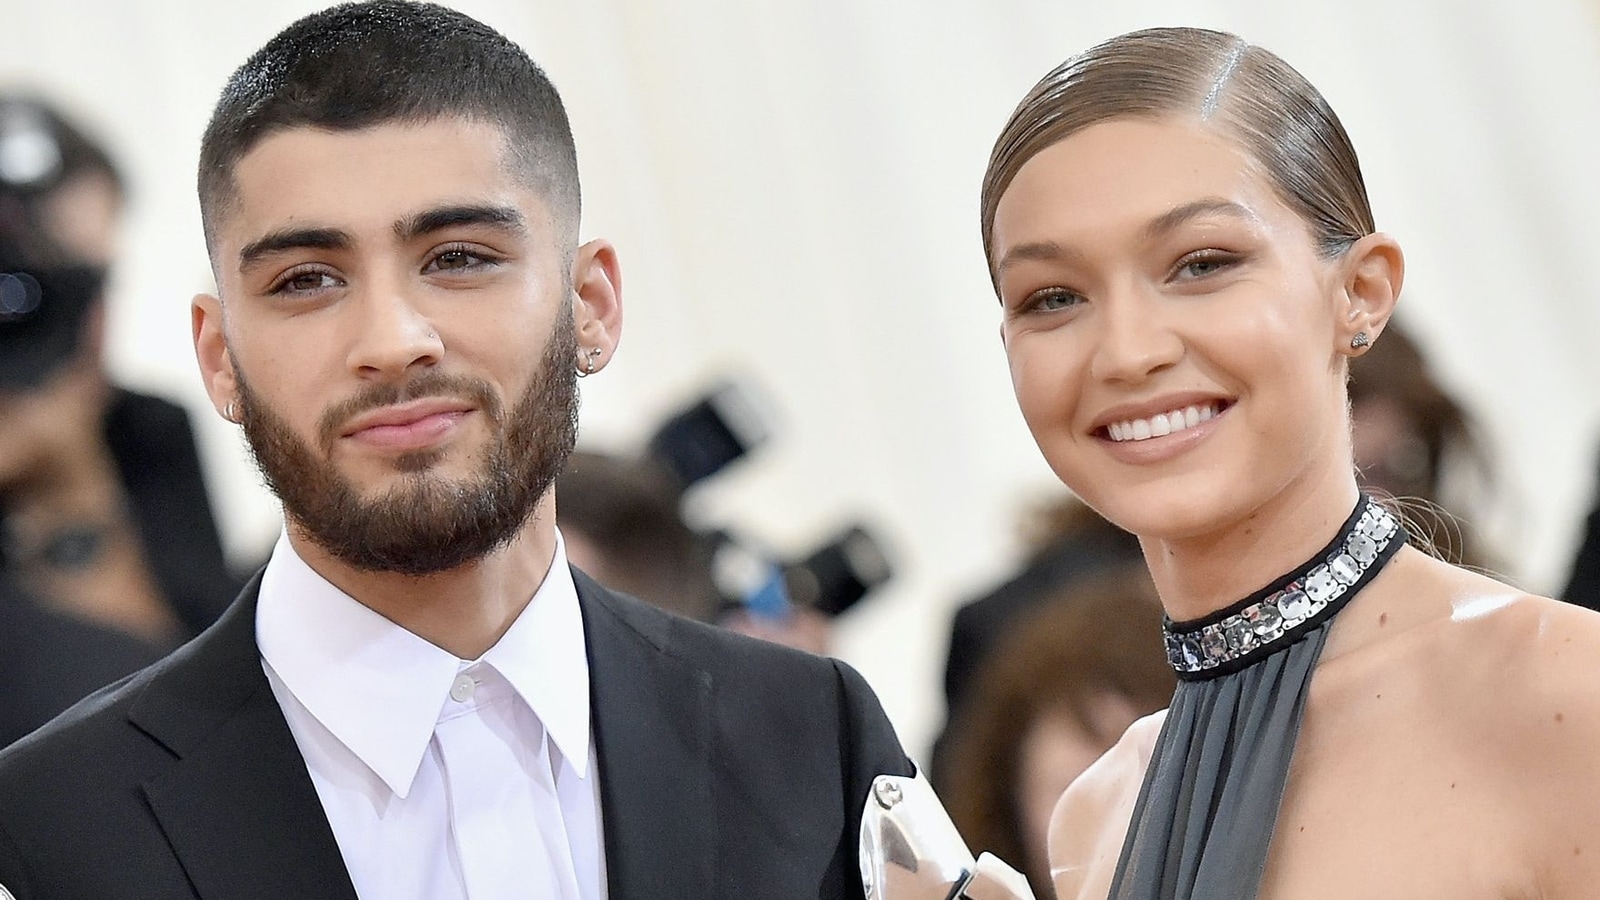 Gigi on recent learnings post split with Zayn: 'I've been reminded that…